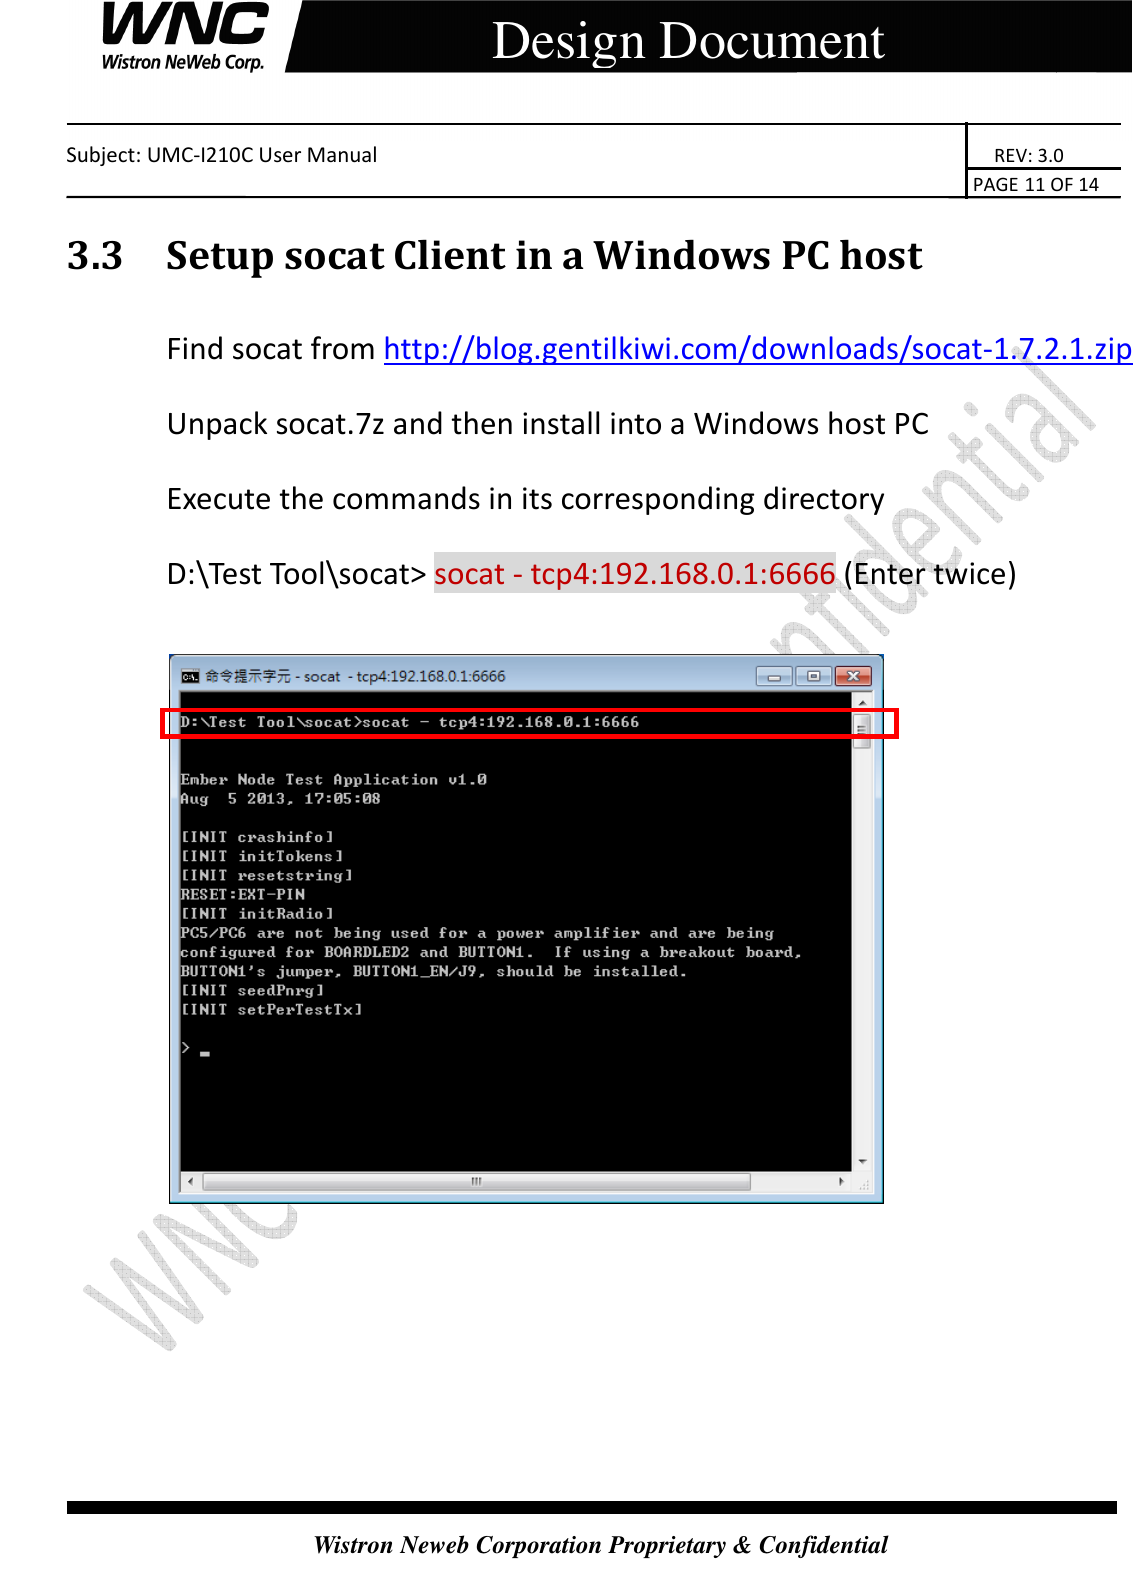    Subject: UMC-I210C User Manual                                                                       REV: 3.0                                                                                                                                                                               PAGE 11 OF 14  Wistron Neweb Corporation Proprietary &amp; Confidential     Design Document 3.3 Setup socat Client in a Windows PC host   Find socat from http://blog.gentilkiwi.com/downloads/socat-1.7.2.1.zip Unpack socat.7z and then install into a Windows host PC Execute the commands in its corresponding directory D:\Test Tool\socat&gt; socat - tcp4:192.168.0.1:6666 (Enter twice)       